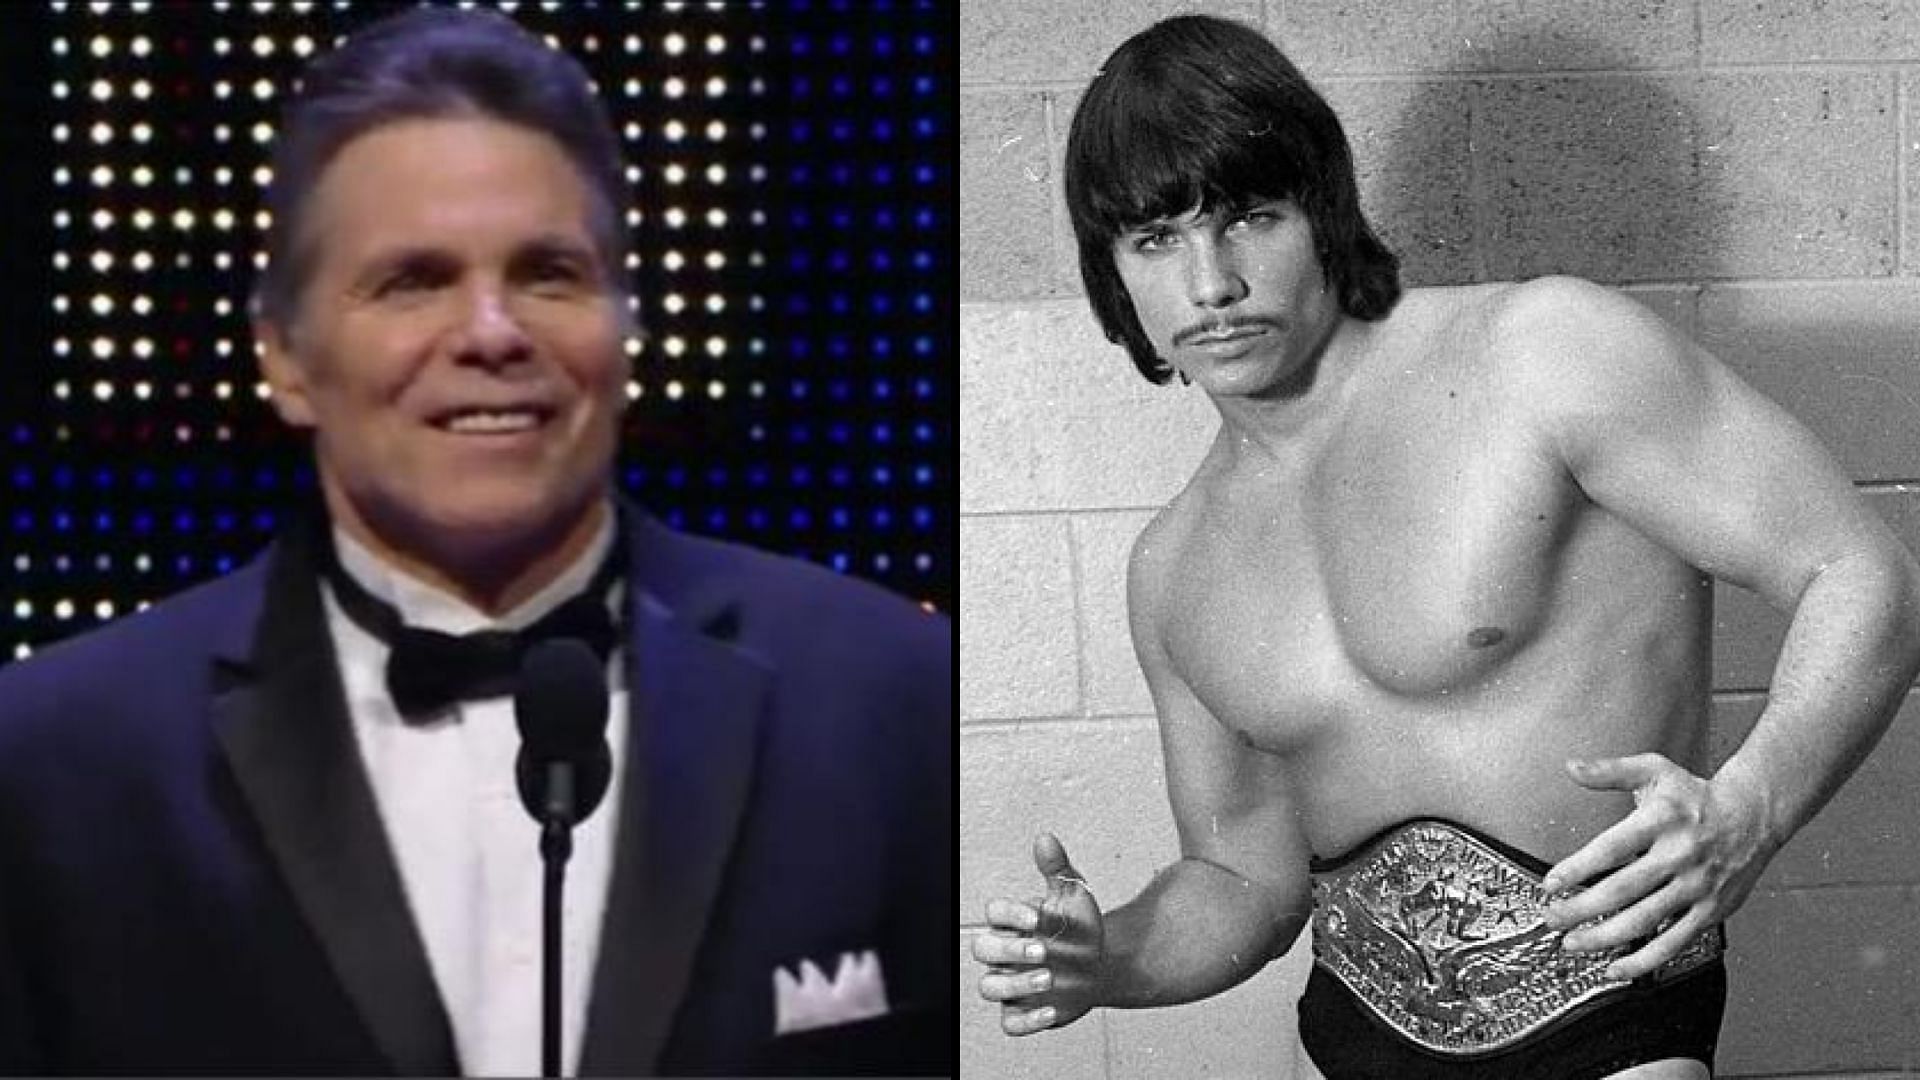 WWE legend, &quot;Leaping&quot; Lanny Poffo aka The Genius